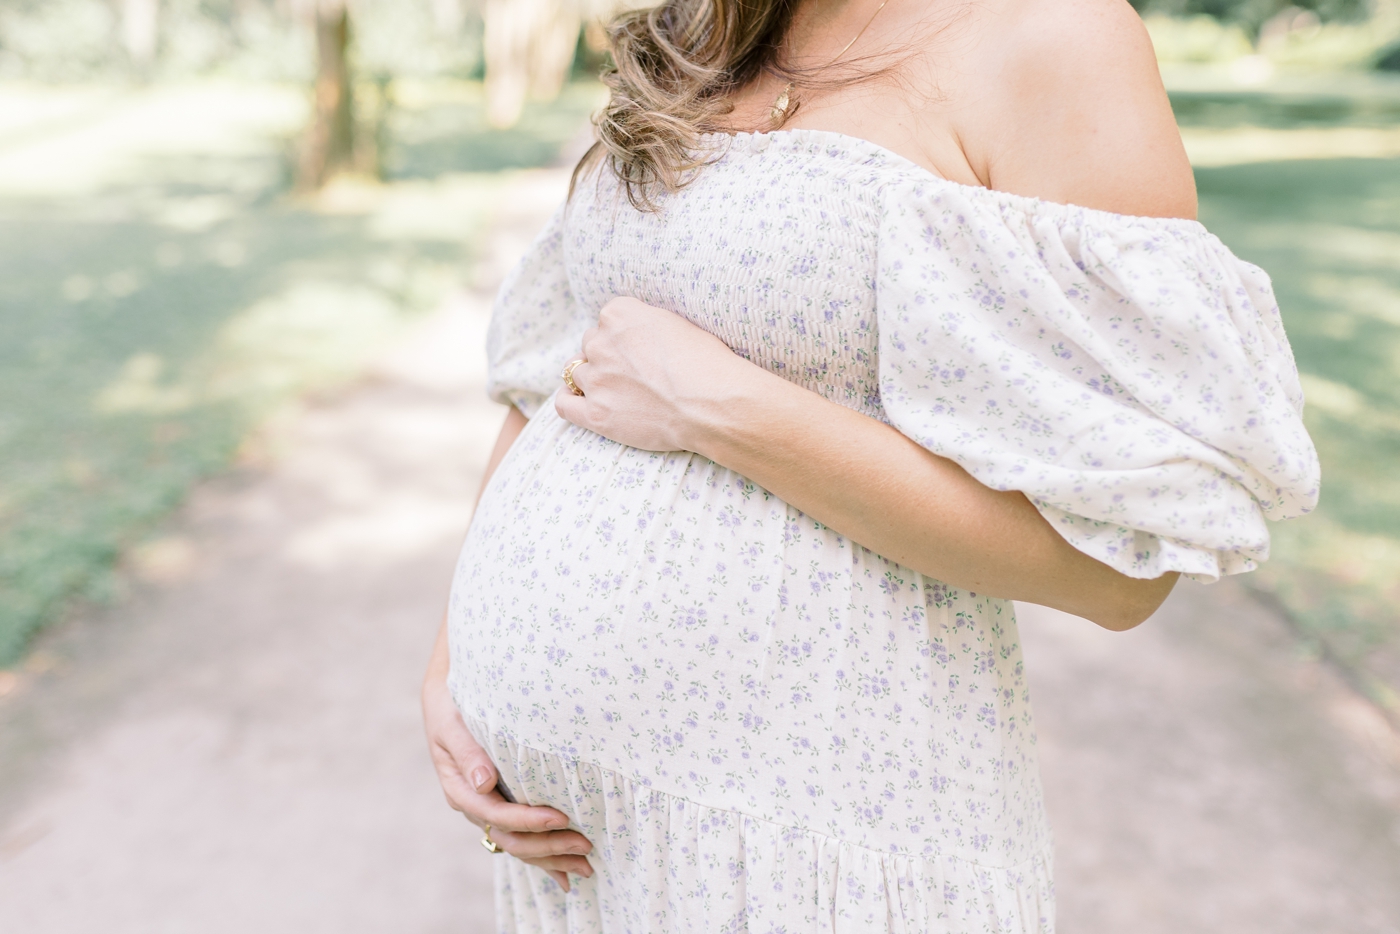 Mom to be cradling her belly in floral print dress | Photo by Caitlyn Motycka Photography.